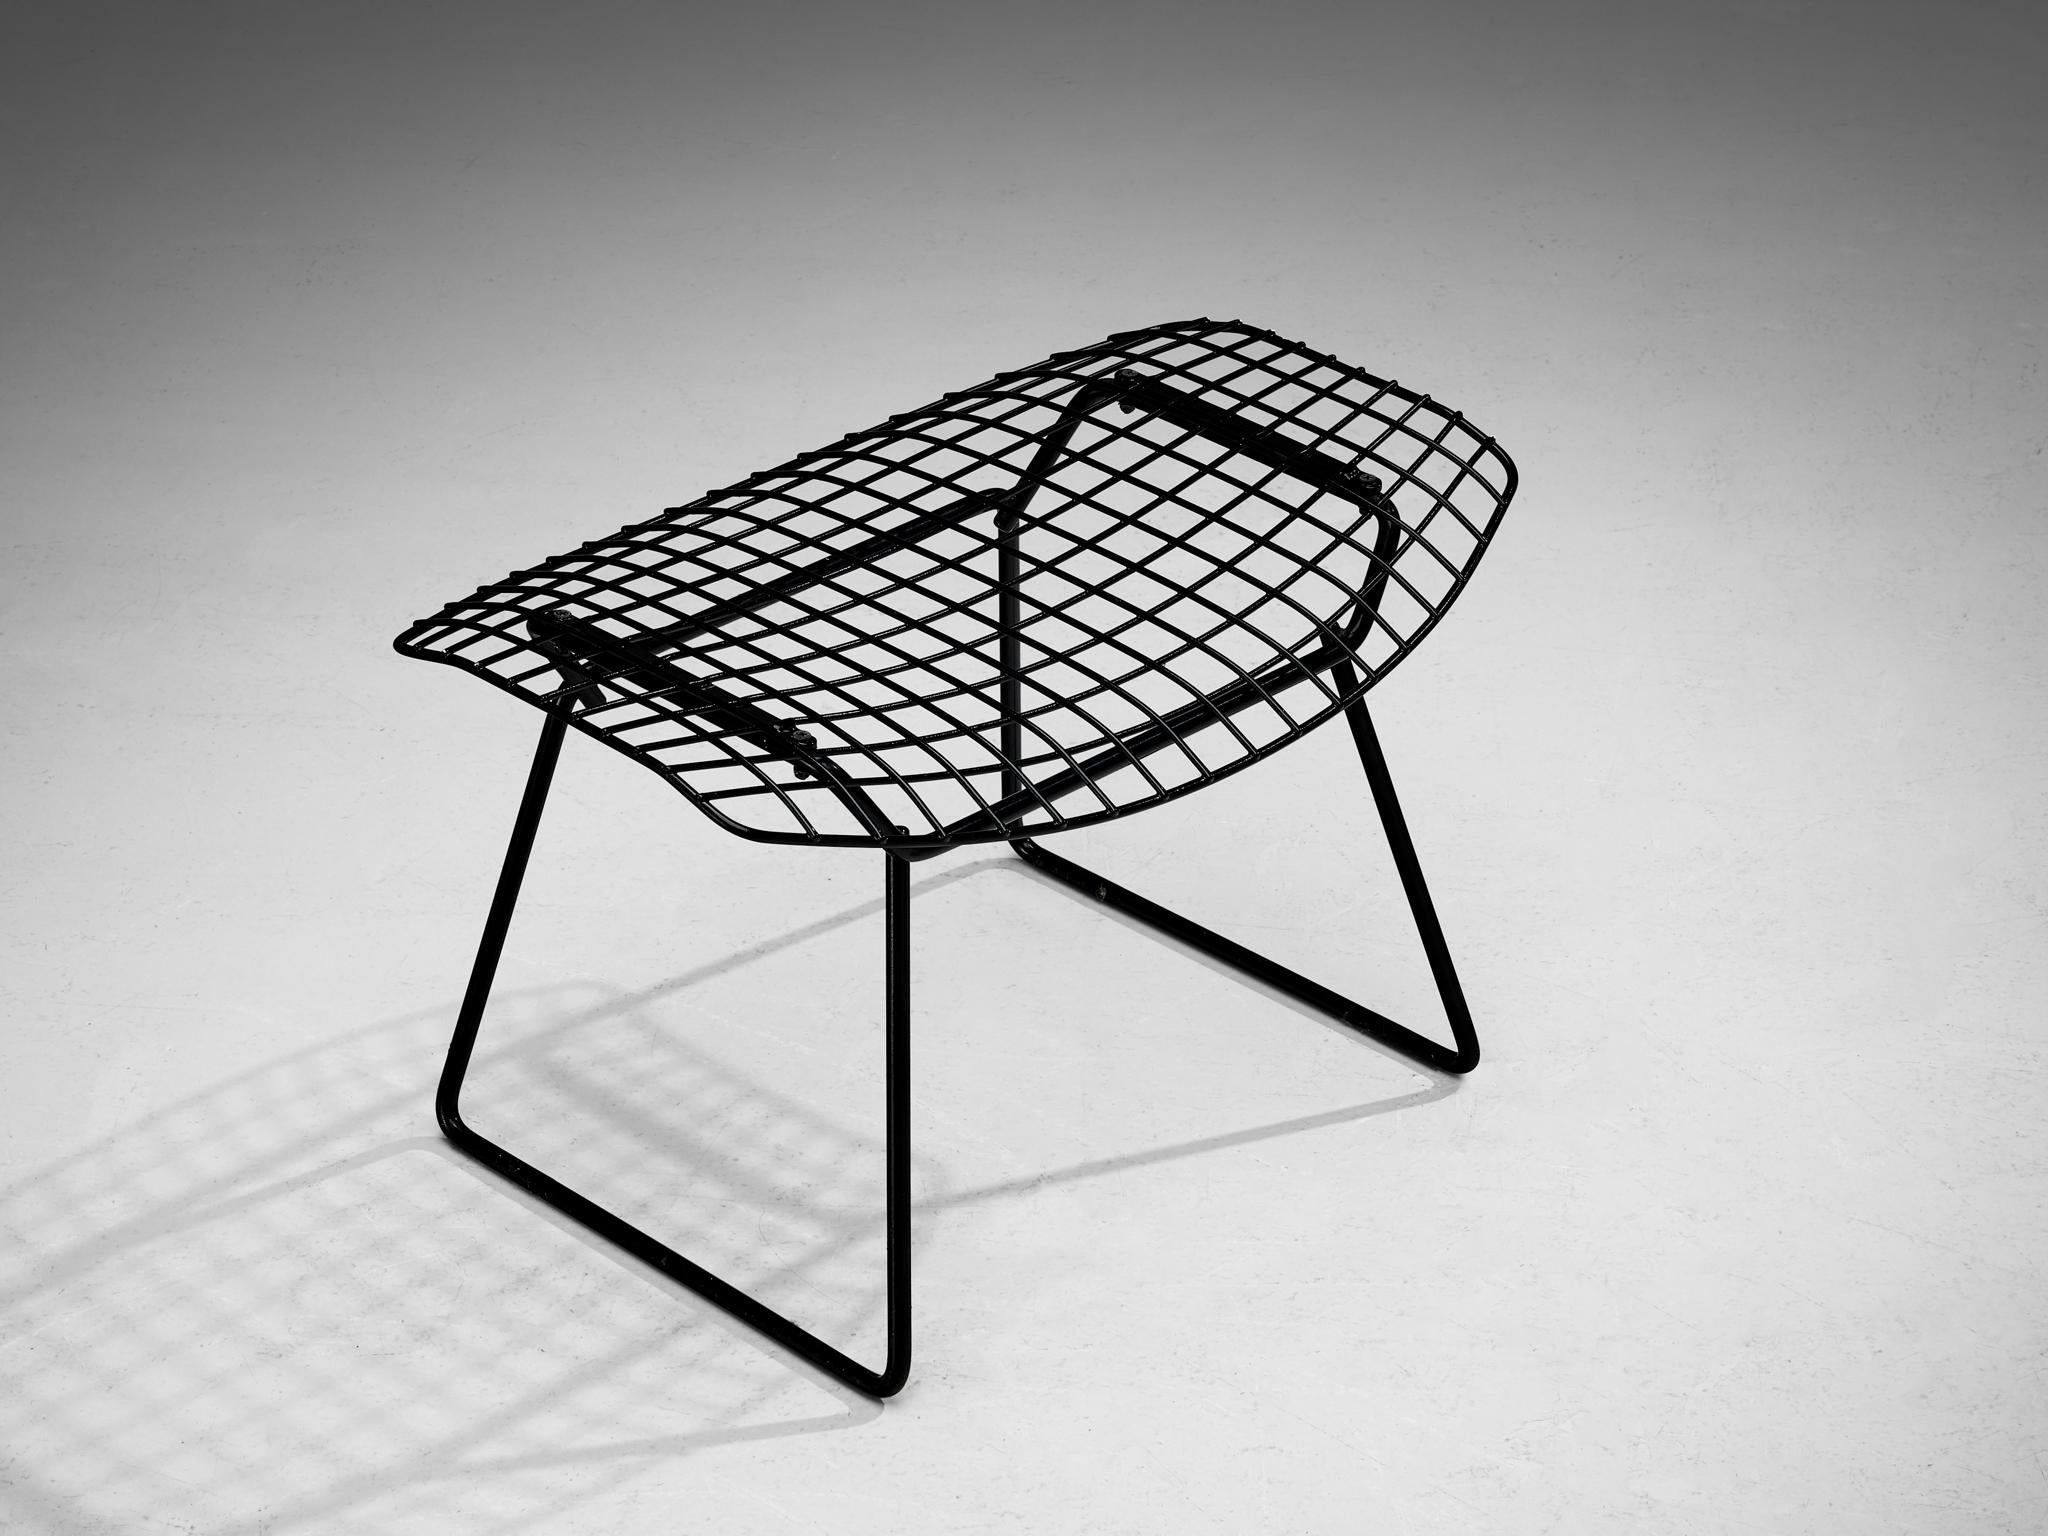 Harry Bertoia for Knoll, 'bird' ottoman, lacquered welded steel, United States, design 1952, later production

This Bird ottoman is a design by Harry Bertoia from 1952. Executed in black lacquered welded steel, this footstool features an intricate